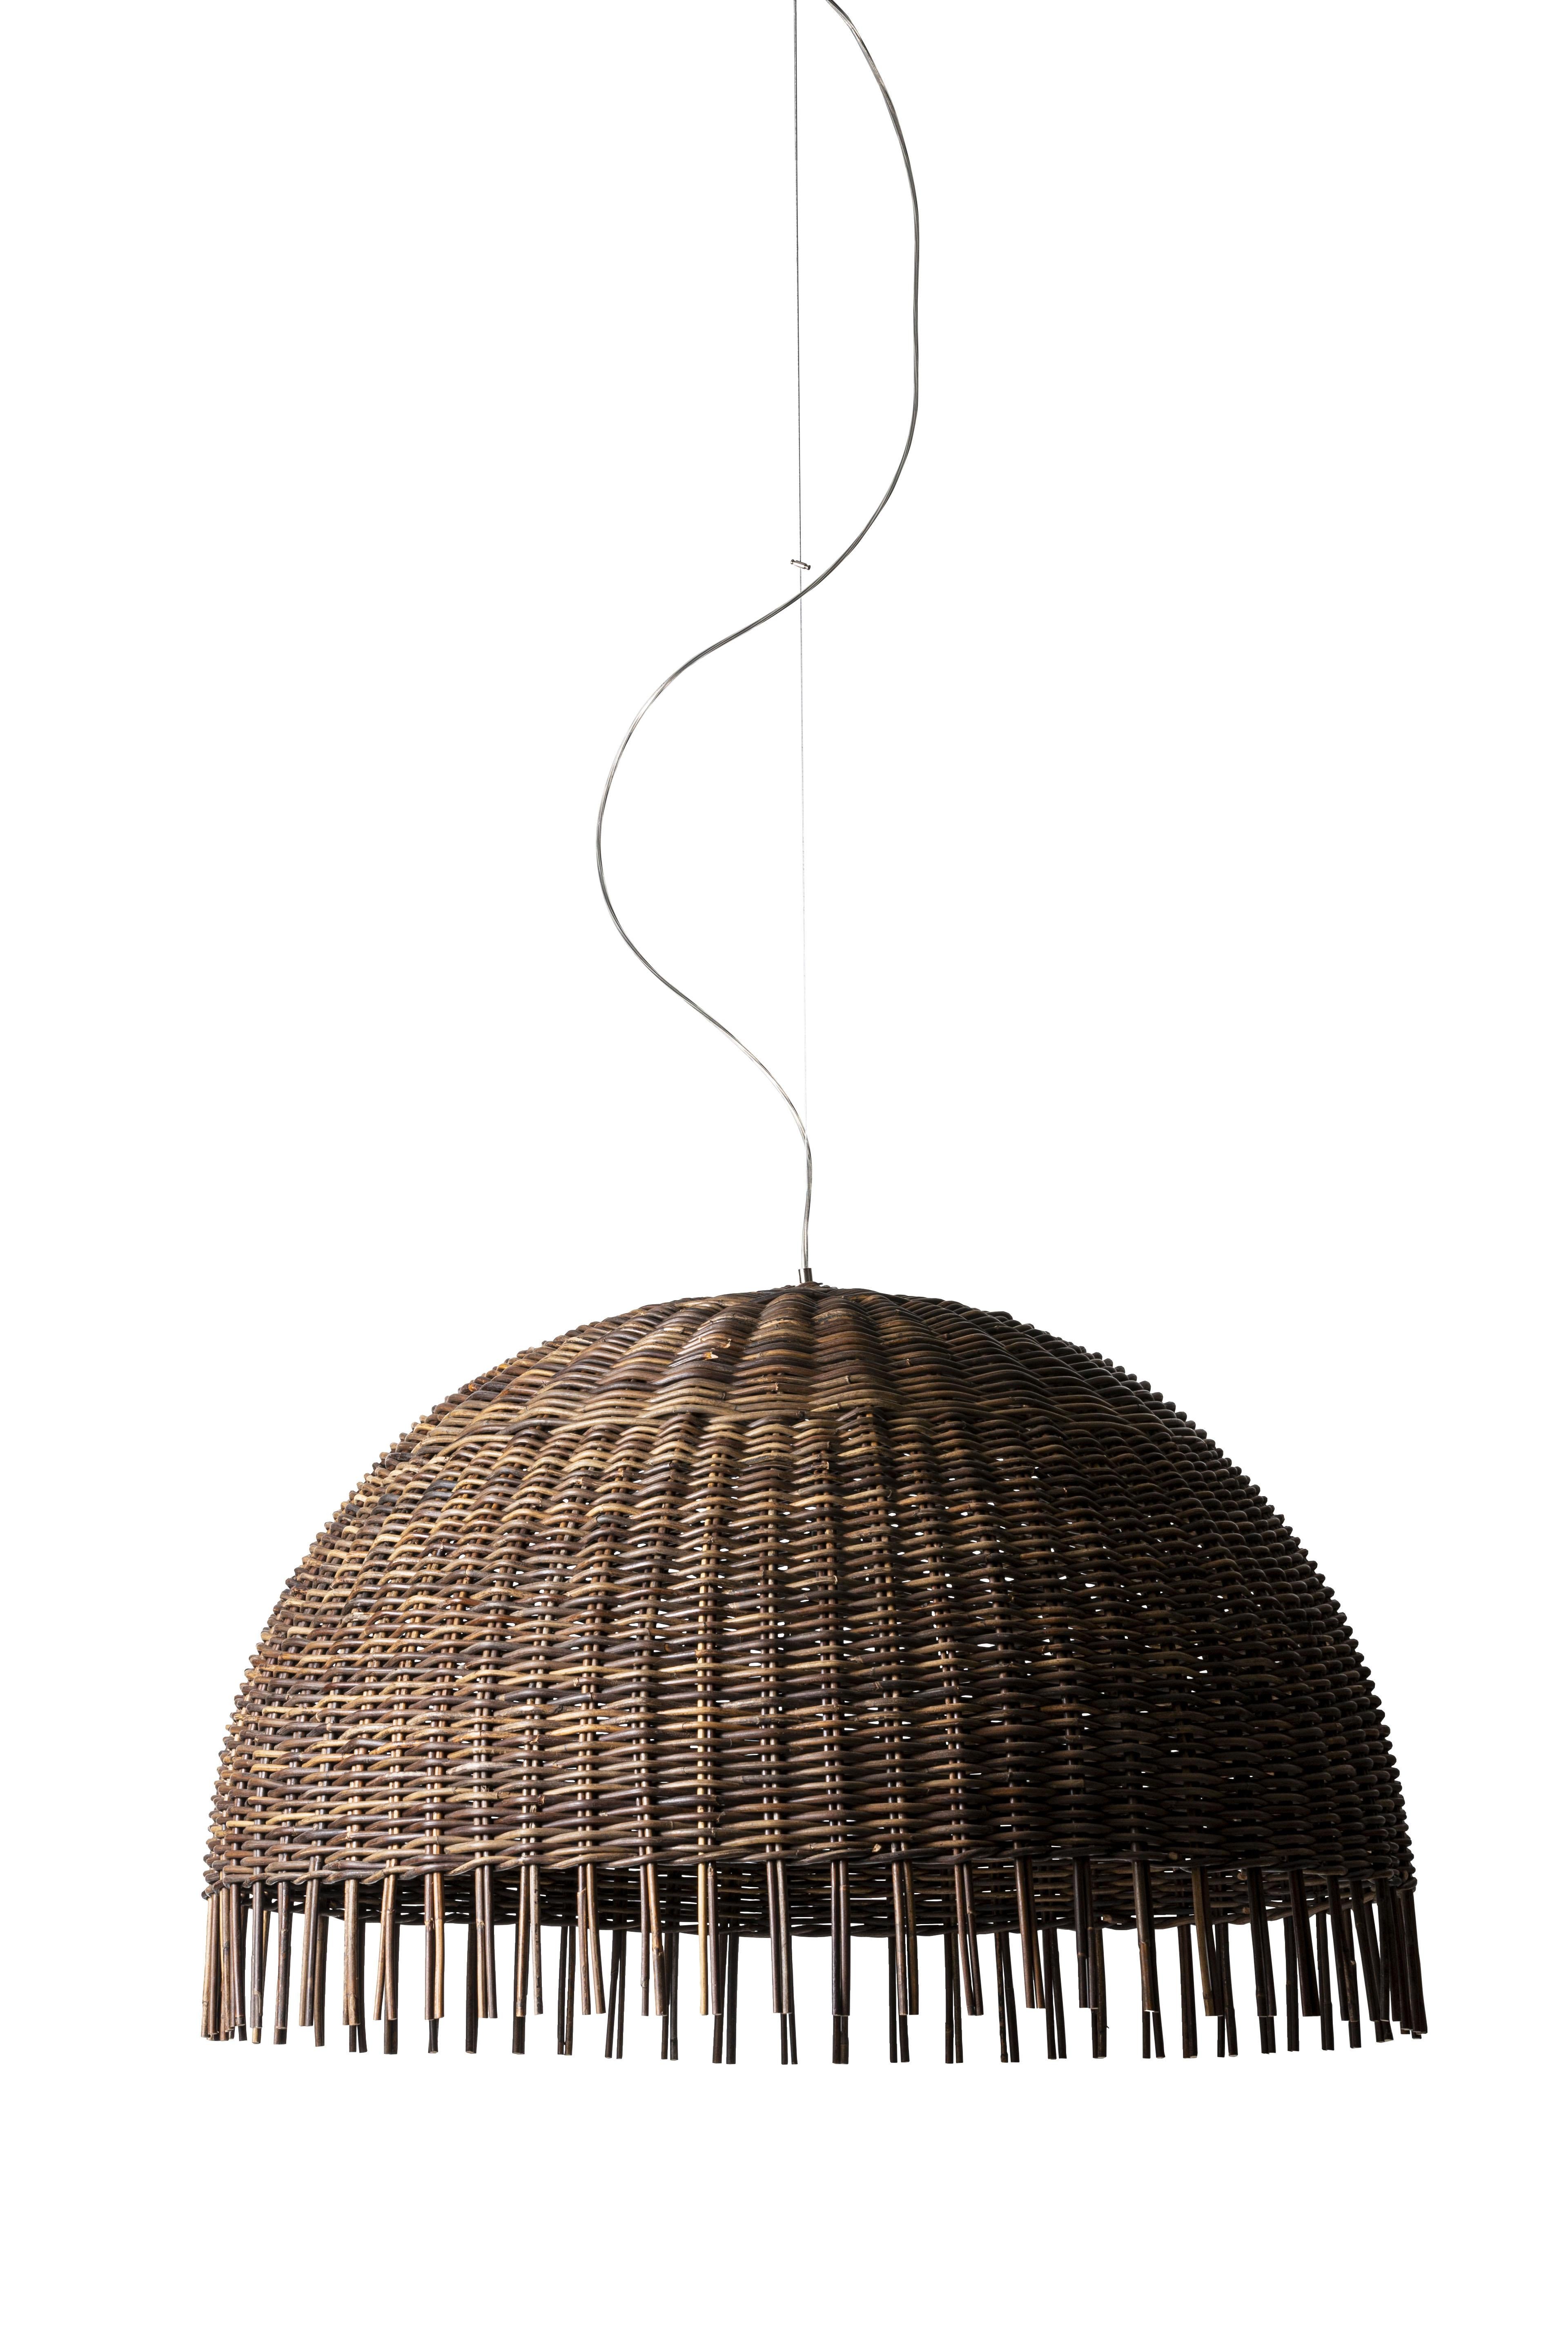 Suspension lamp in crocodile rattan, handwoven, max. power 20 W, 220 Volt, bulb holder E 27, bulb not included (electrical cable lenght 200 cm; steel cable lenght 200 cm).

Additional Information:
Material: Crocodile rattan
Power supply: Max.